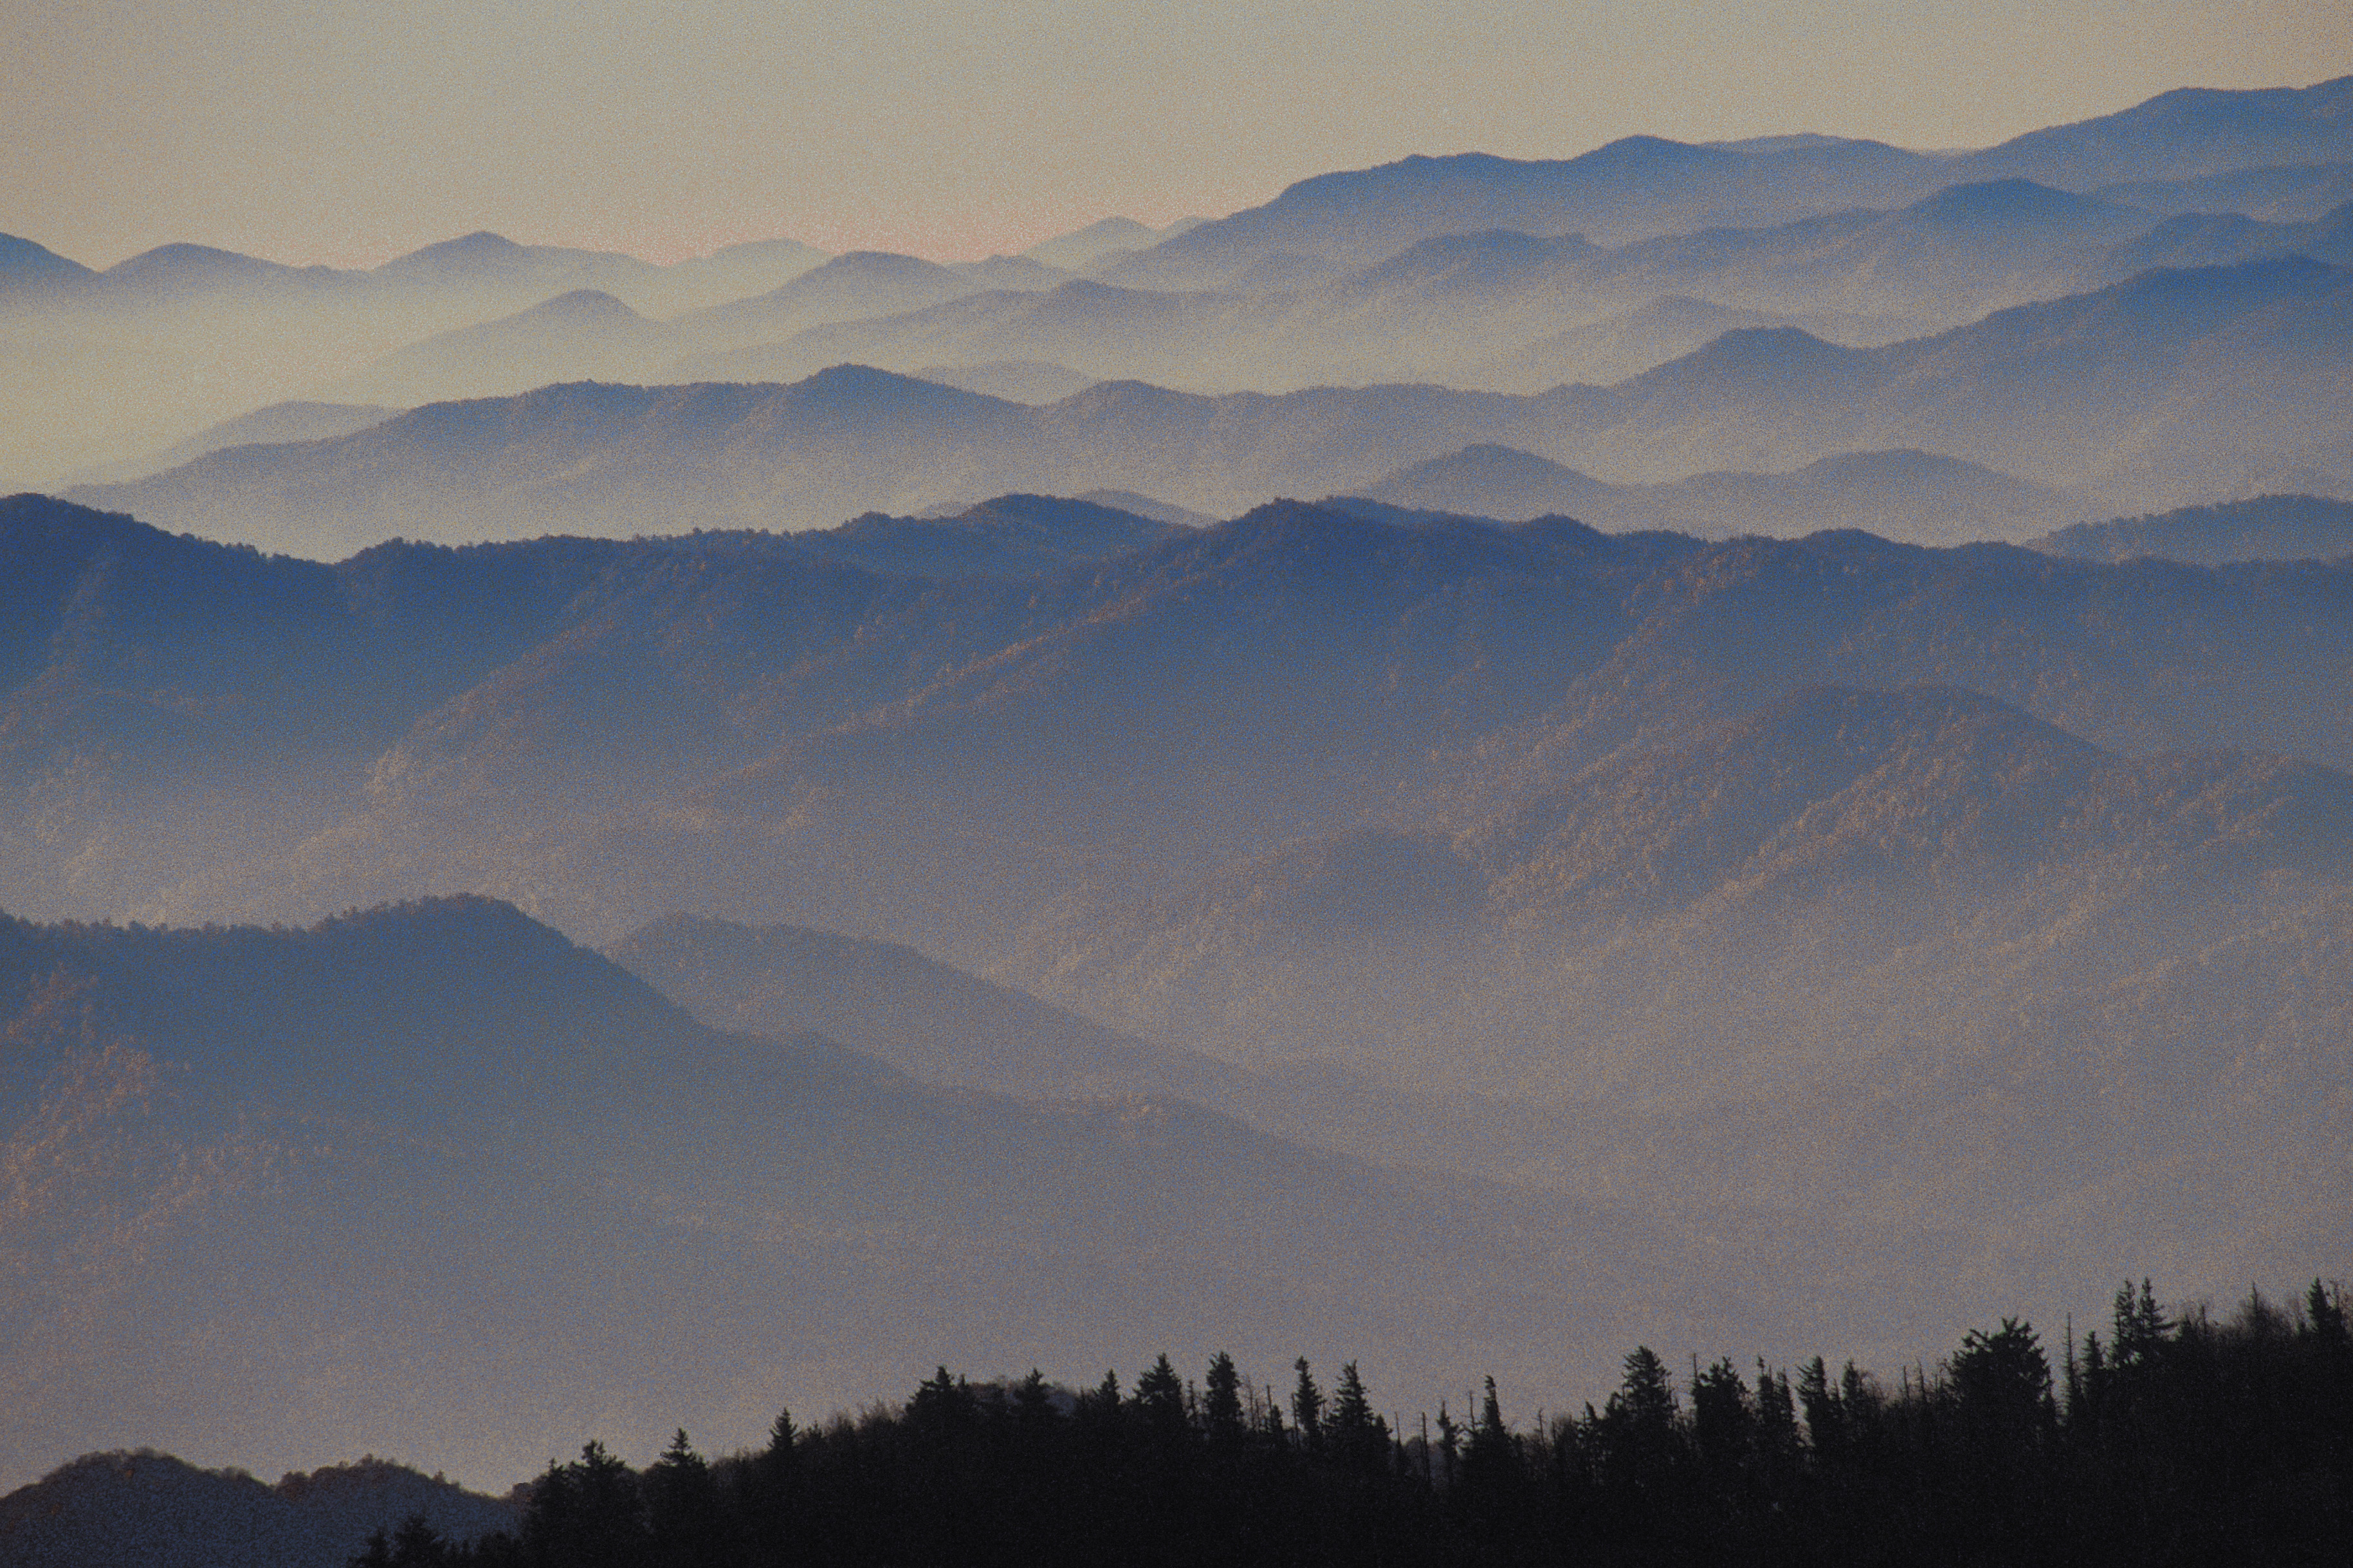 The 10 Tallest Mountains East of the Mississippi | USA Today